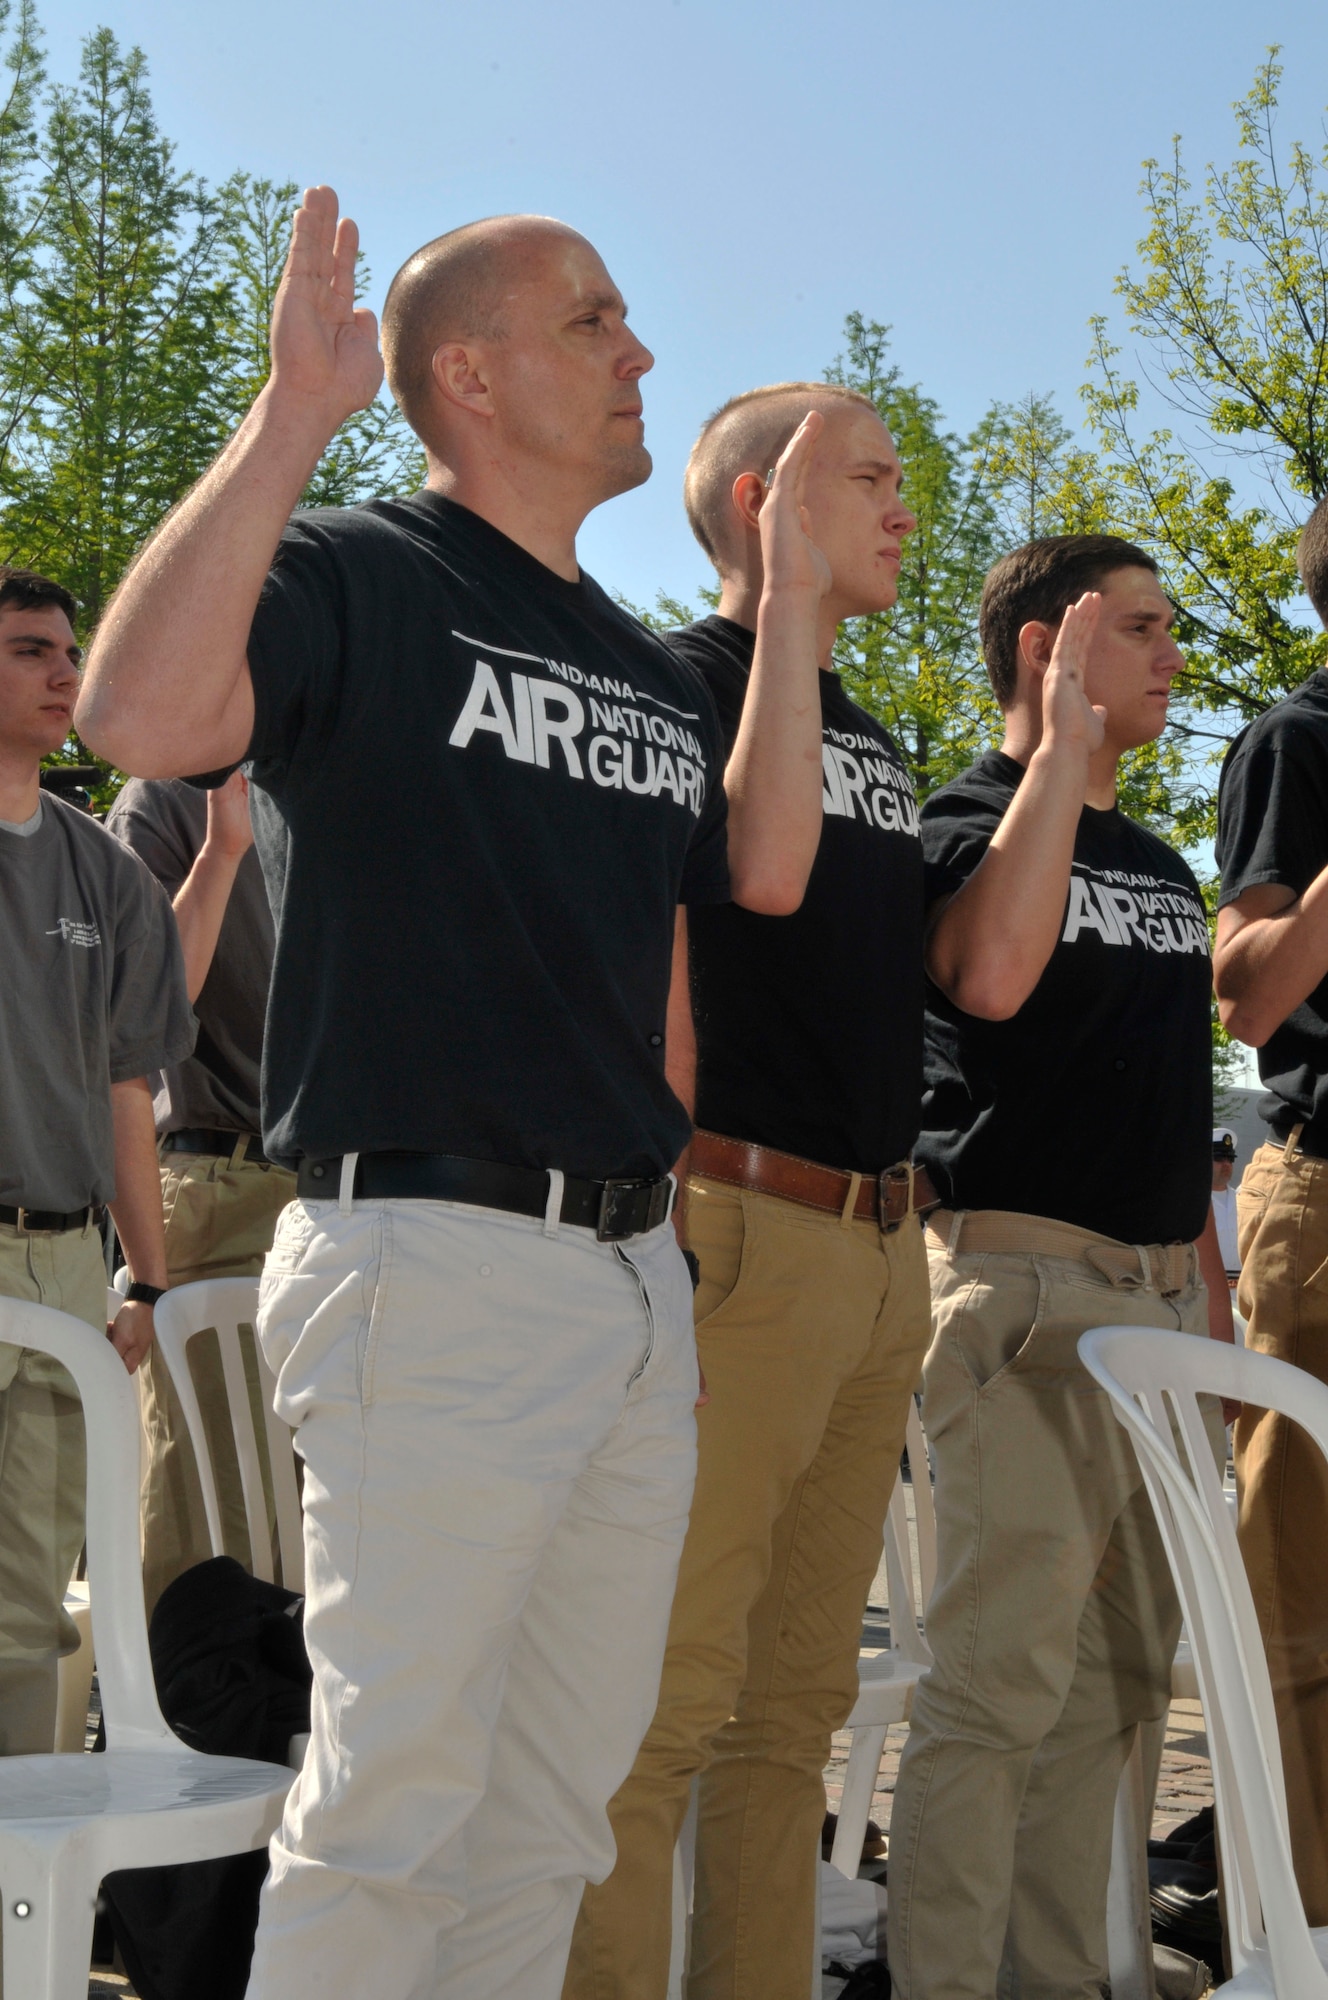 Patrick (left) and Taylor Affolder (center), recent recruits of the 122nd Fighter Wing, Fort Wayne Air National Guard Base, raise their hands for the Oath of Enlistment during a mass enlistment ceremony on May 18, 2014 at the Indianapolis Motor Speedway. The father and son duo could find no better way to begin their military careers than to enlist together at the annual ceremony held  during Armed Forces Weekend. (Air National Guard photo by Airman 1st Class Justin Andras/Released)